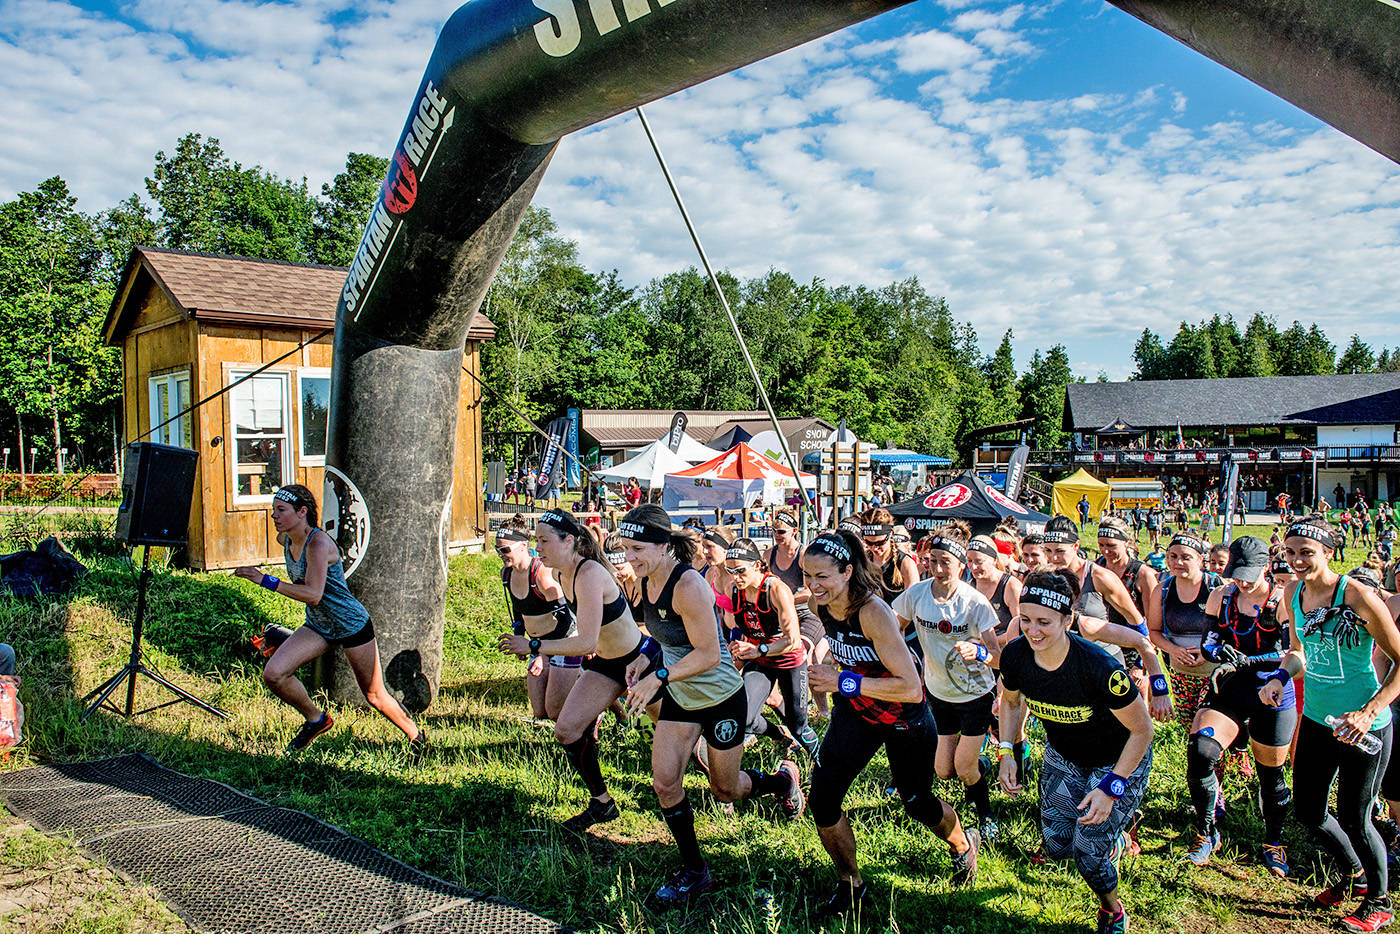 Getting out of your comfort zone with the Spartan Race